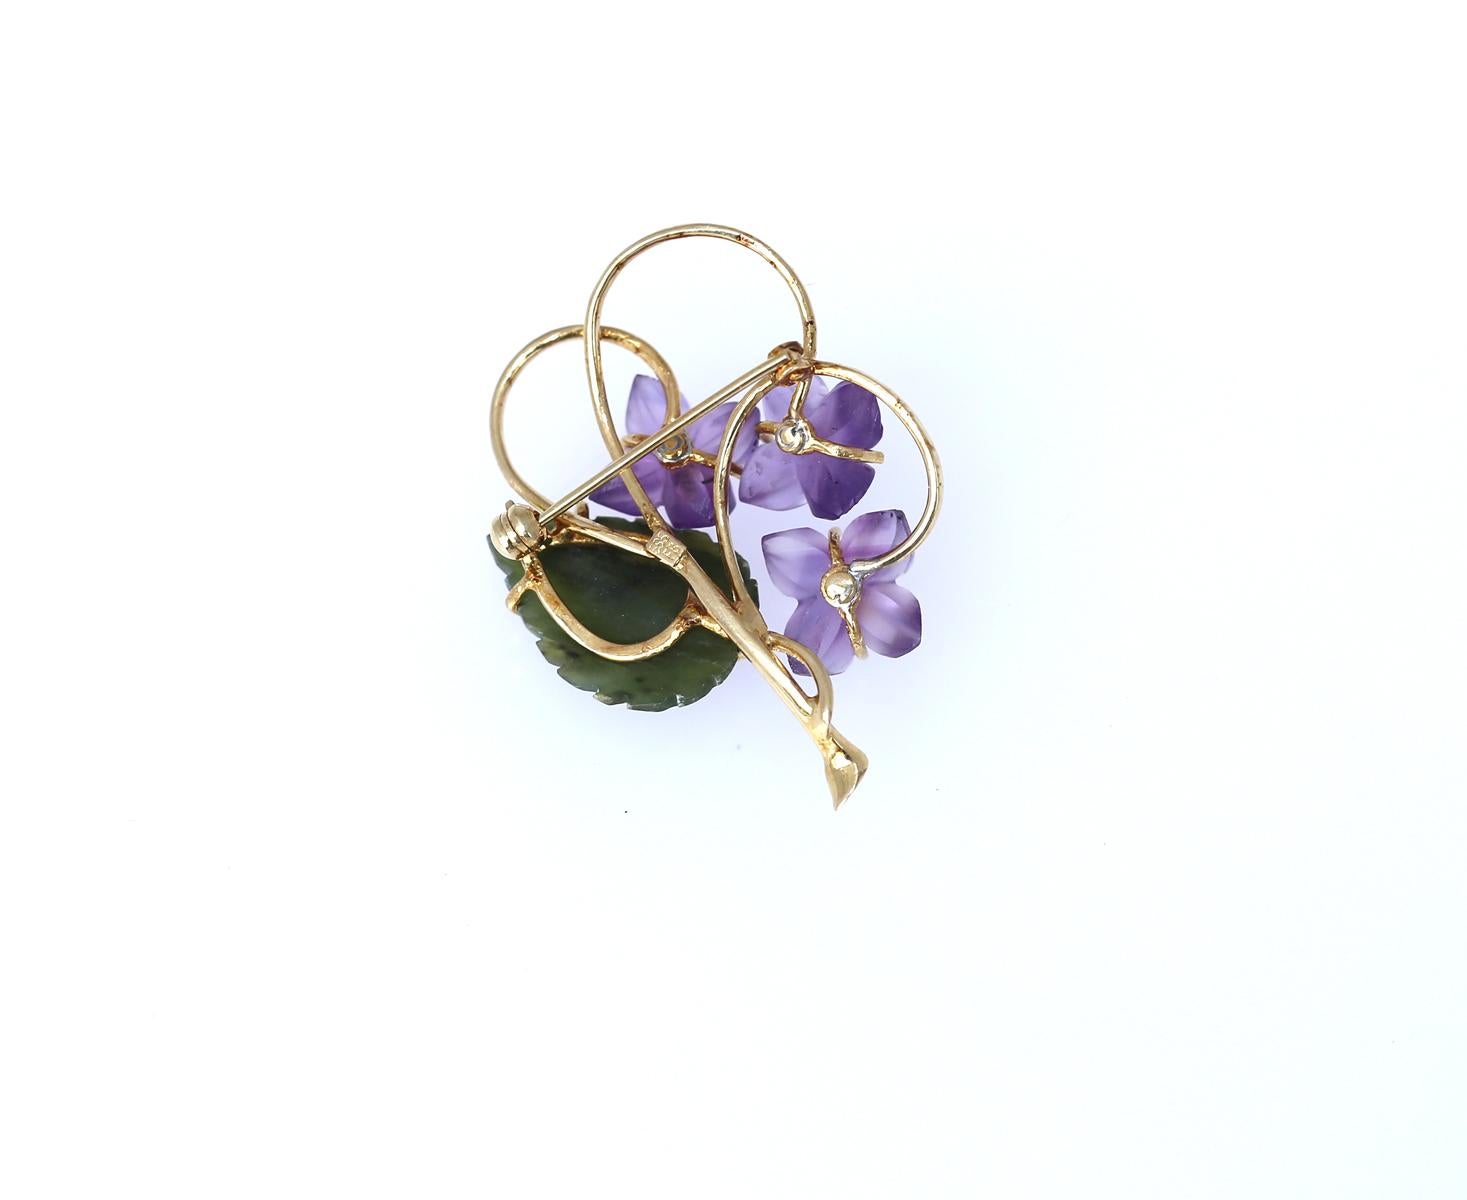 violet quartz used as decoration in brooches